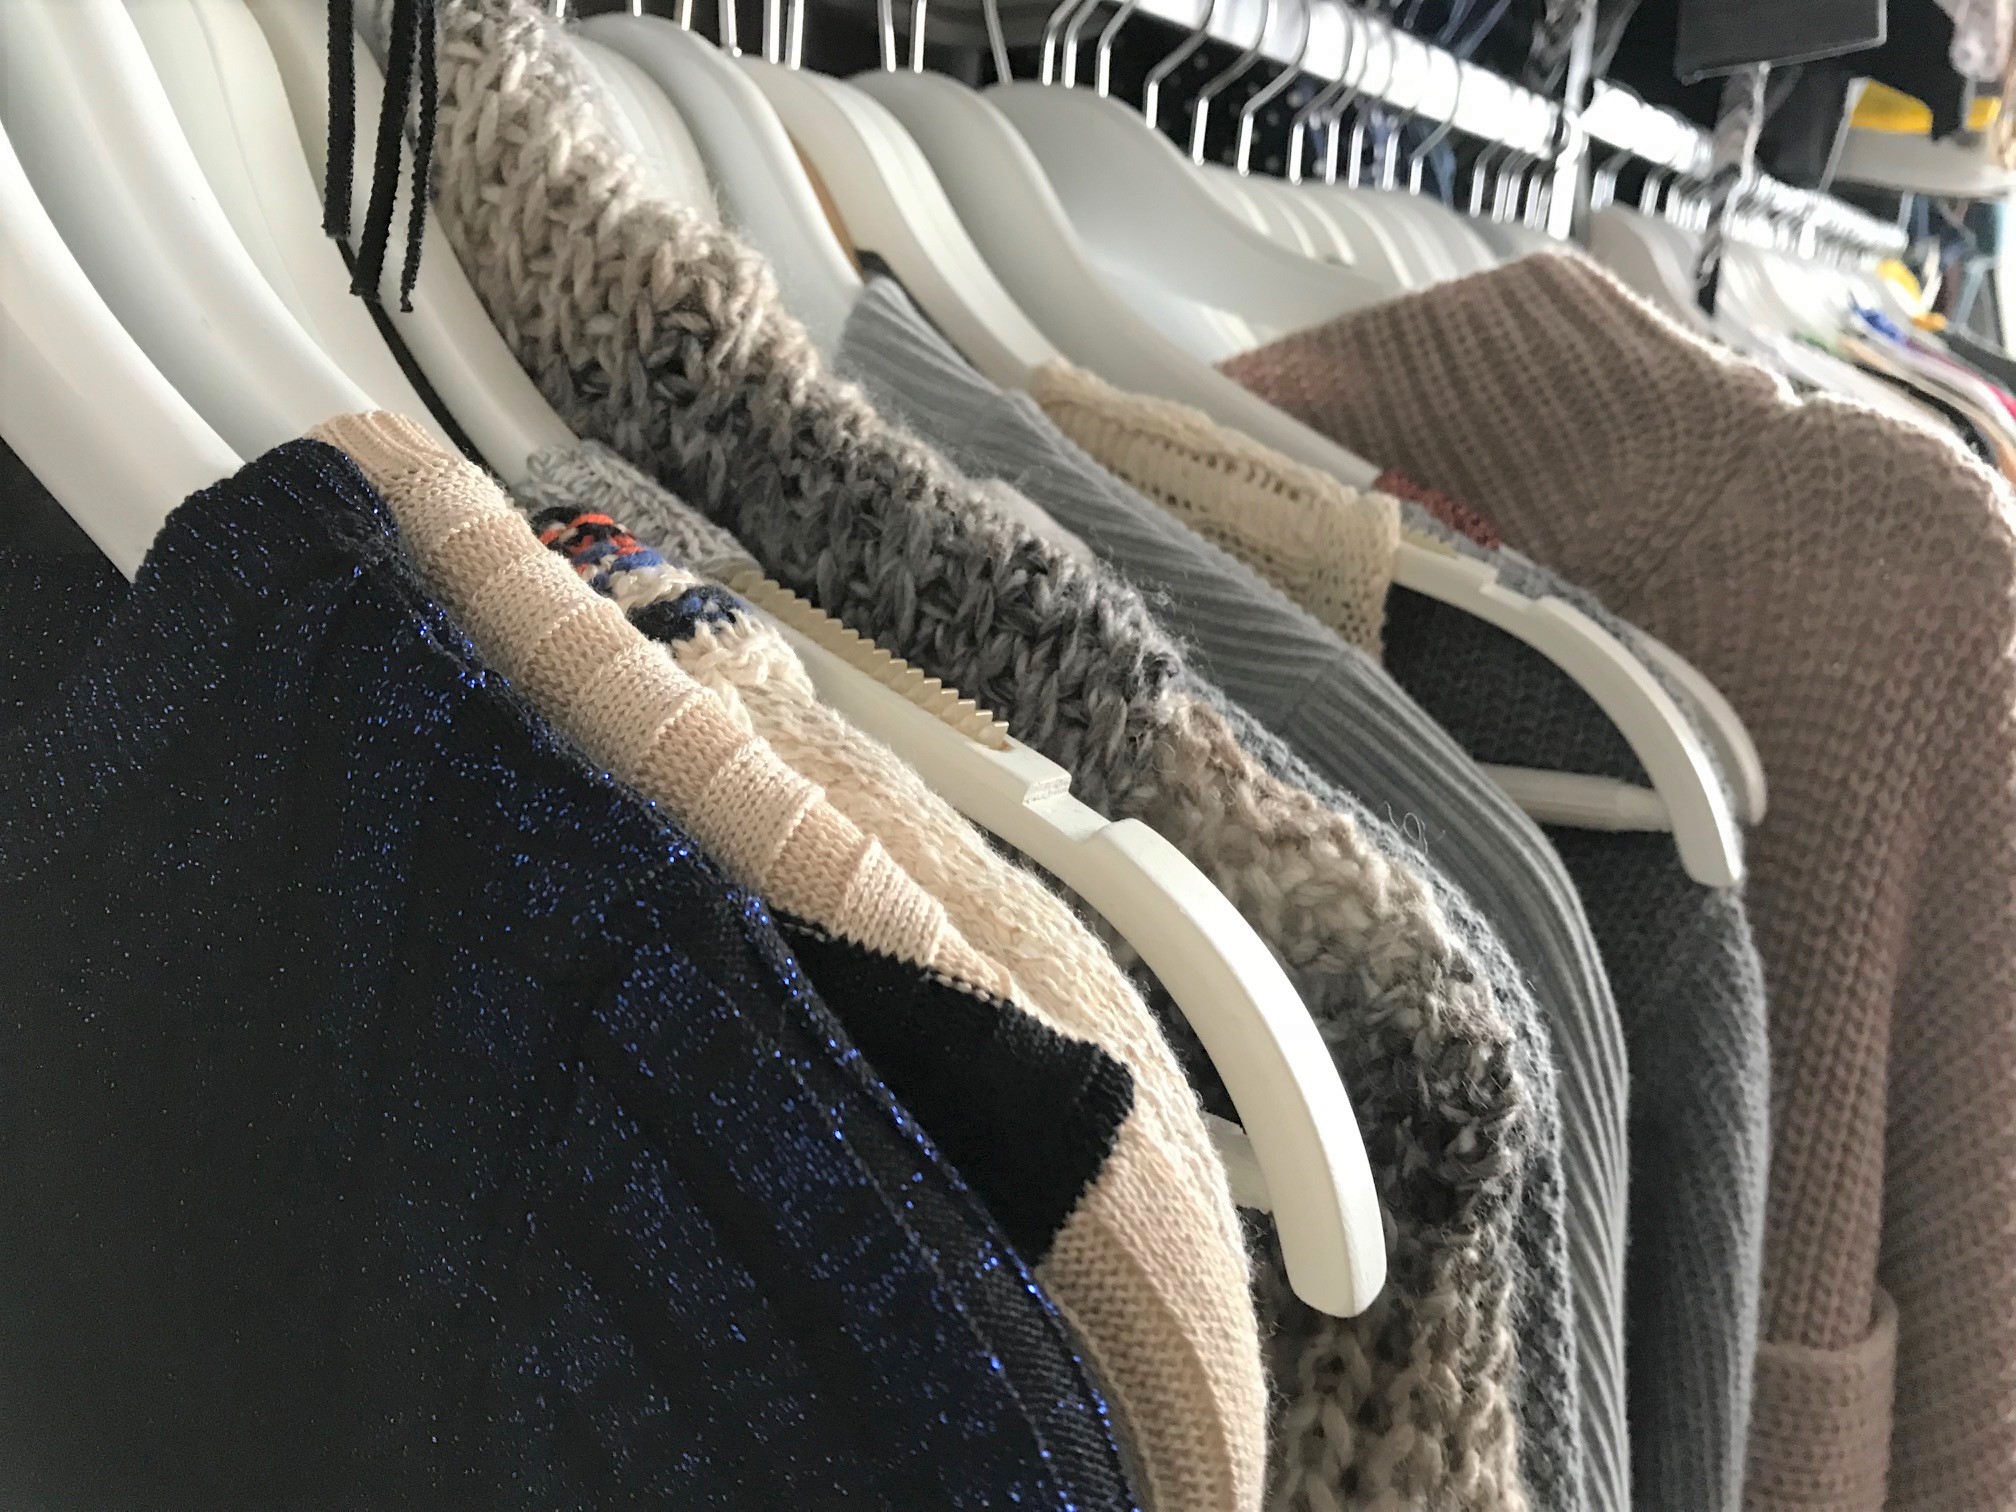 Pullovers, cardigans,sweaters...